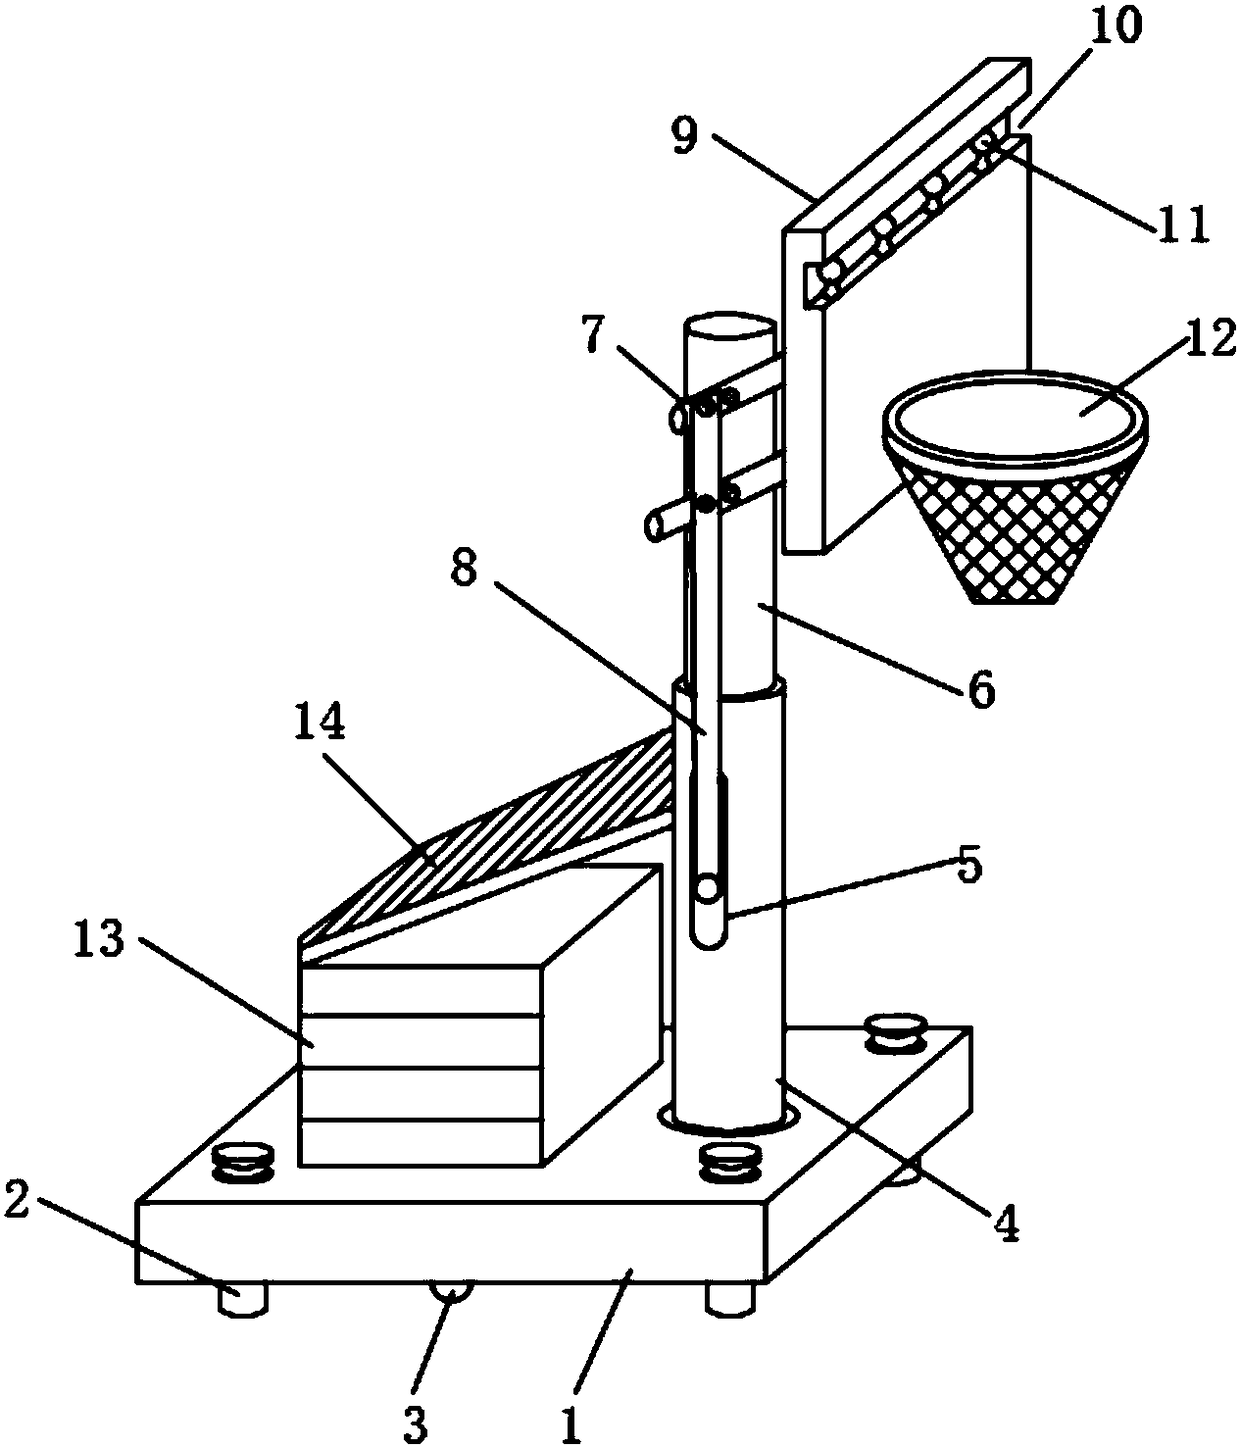 Basketball frame convenient to regulate height of basket